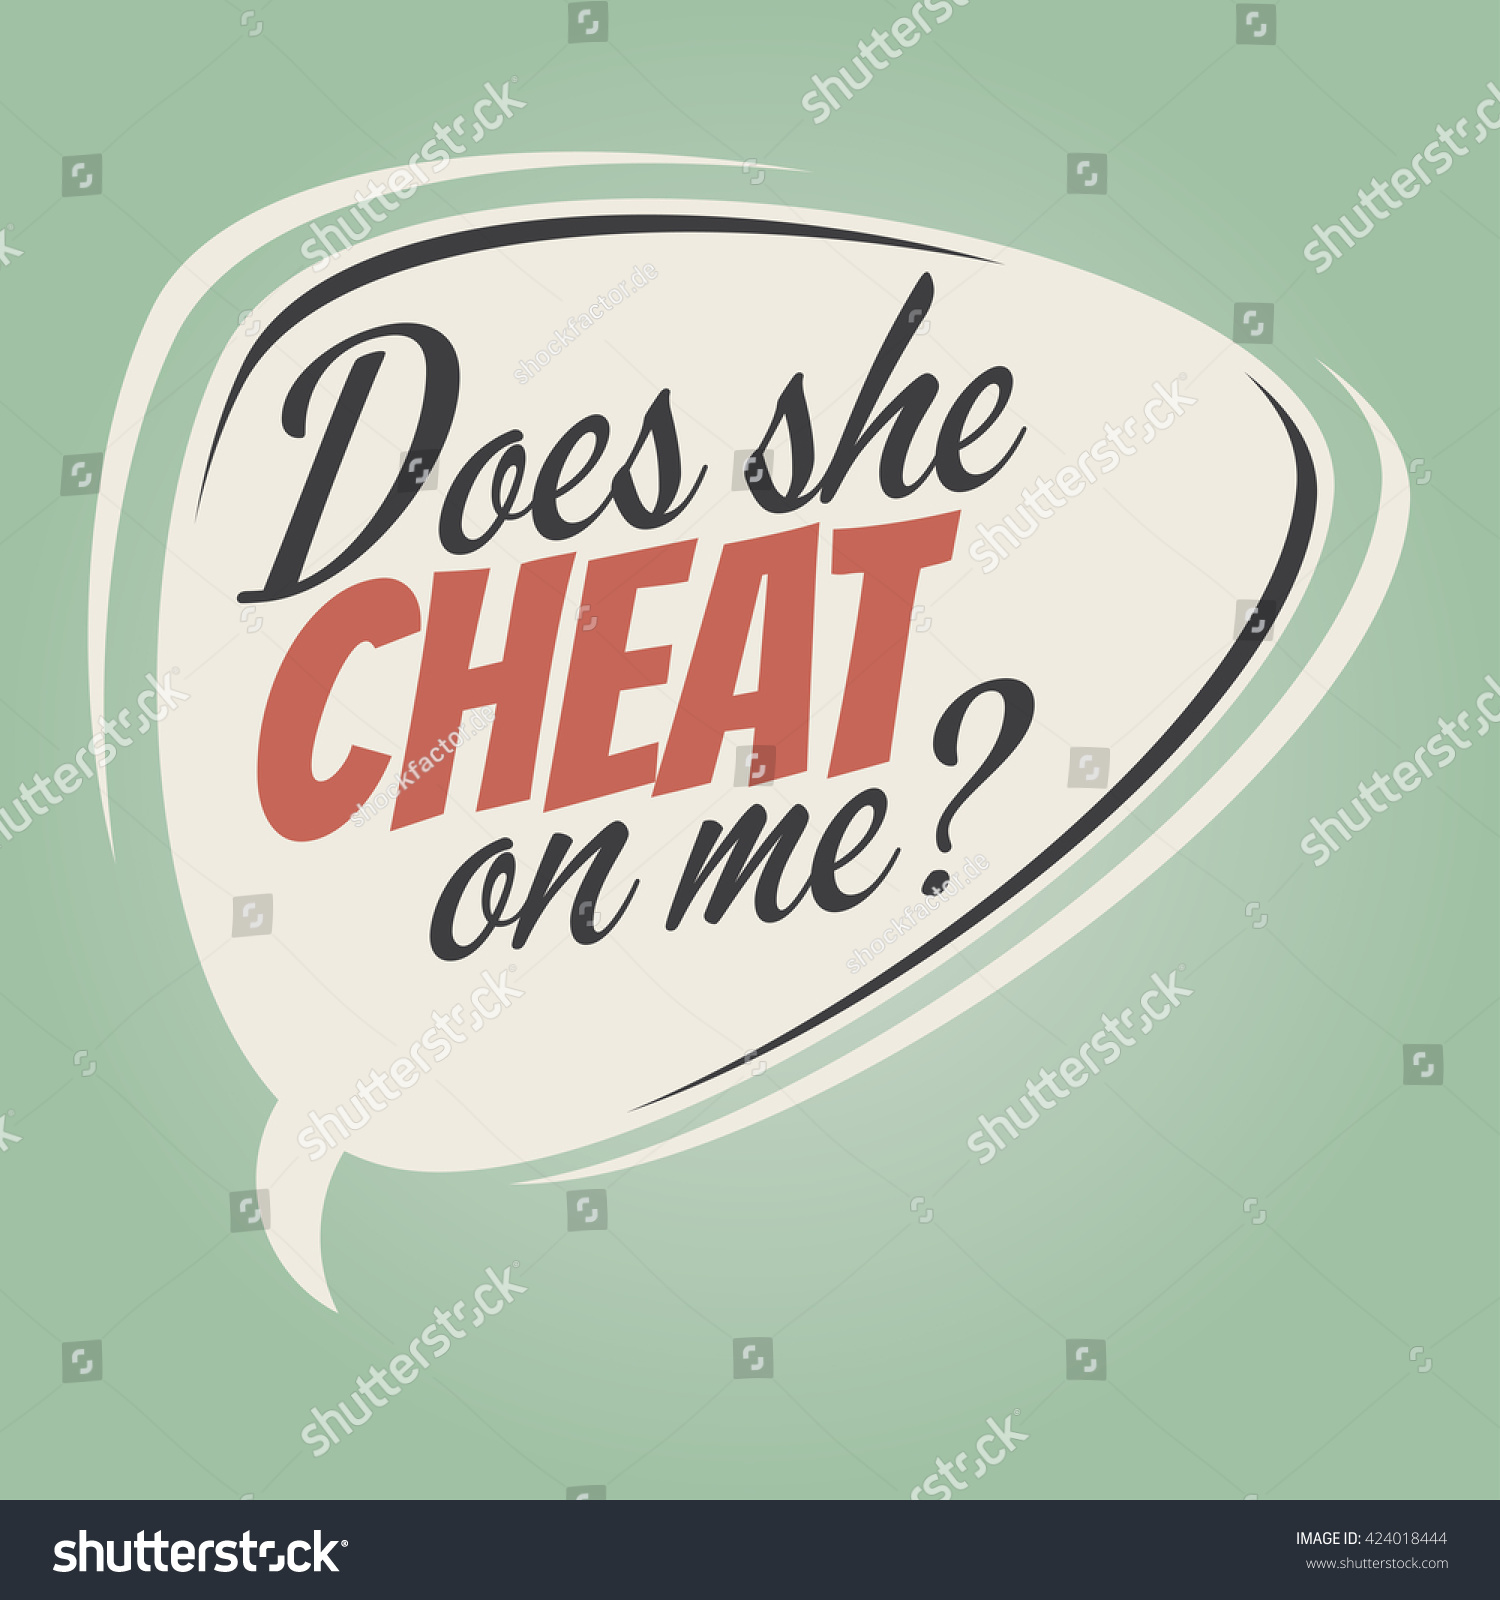 Why does she cheat